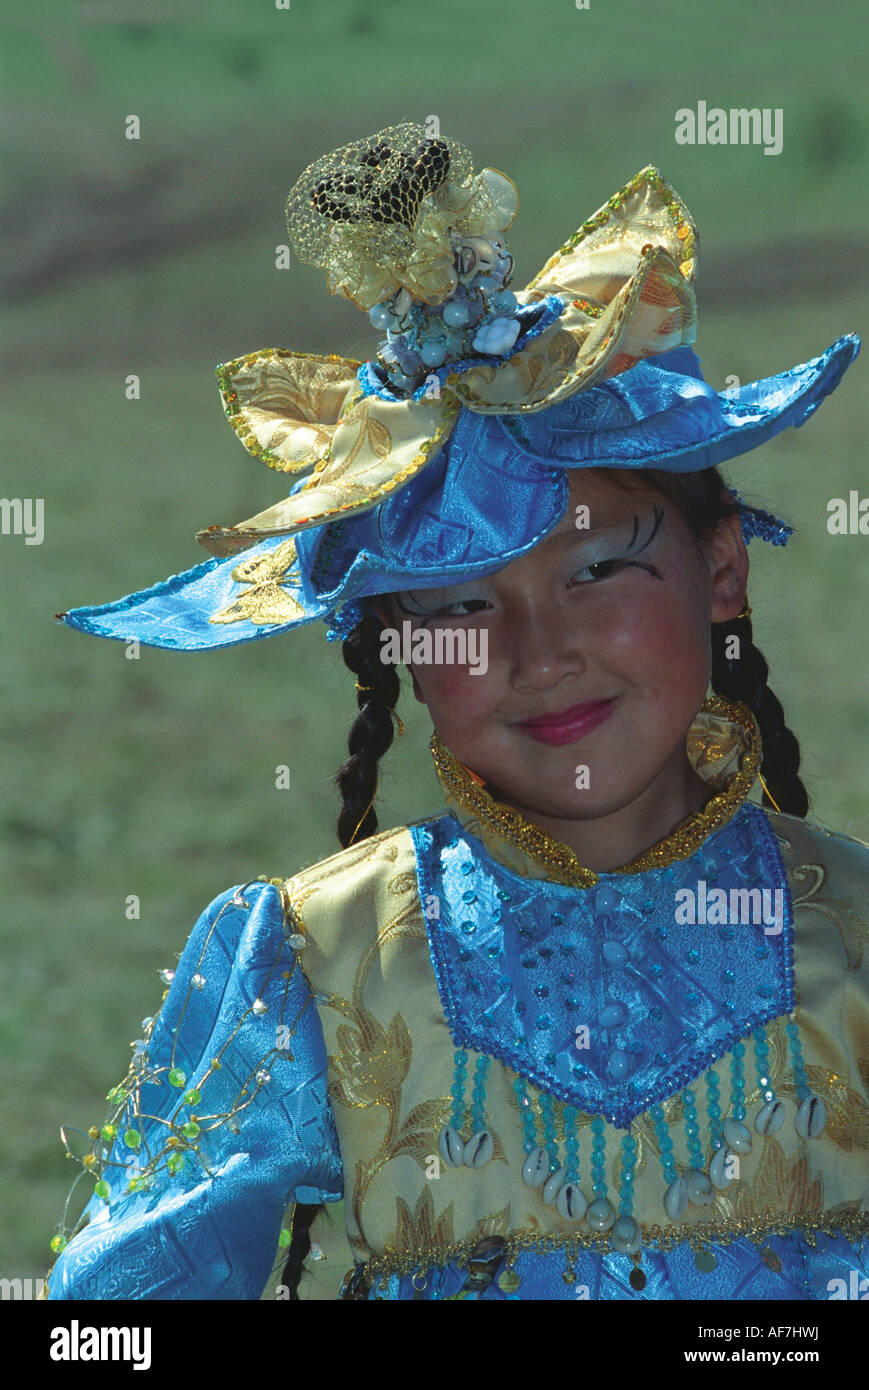 Portrait of a girl in handmade costume made in native Altaic manner. El-Oiyn - national festival of Altaic people. Russia Stock Photo